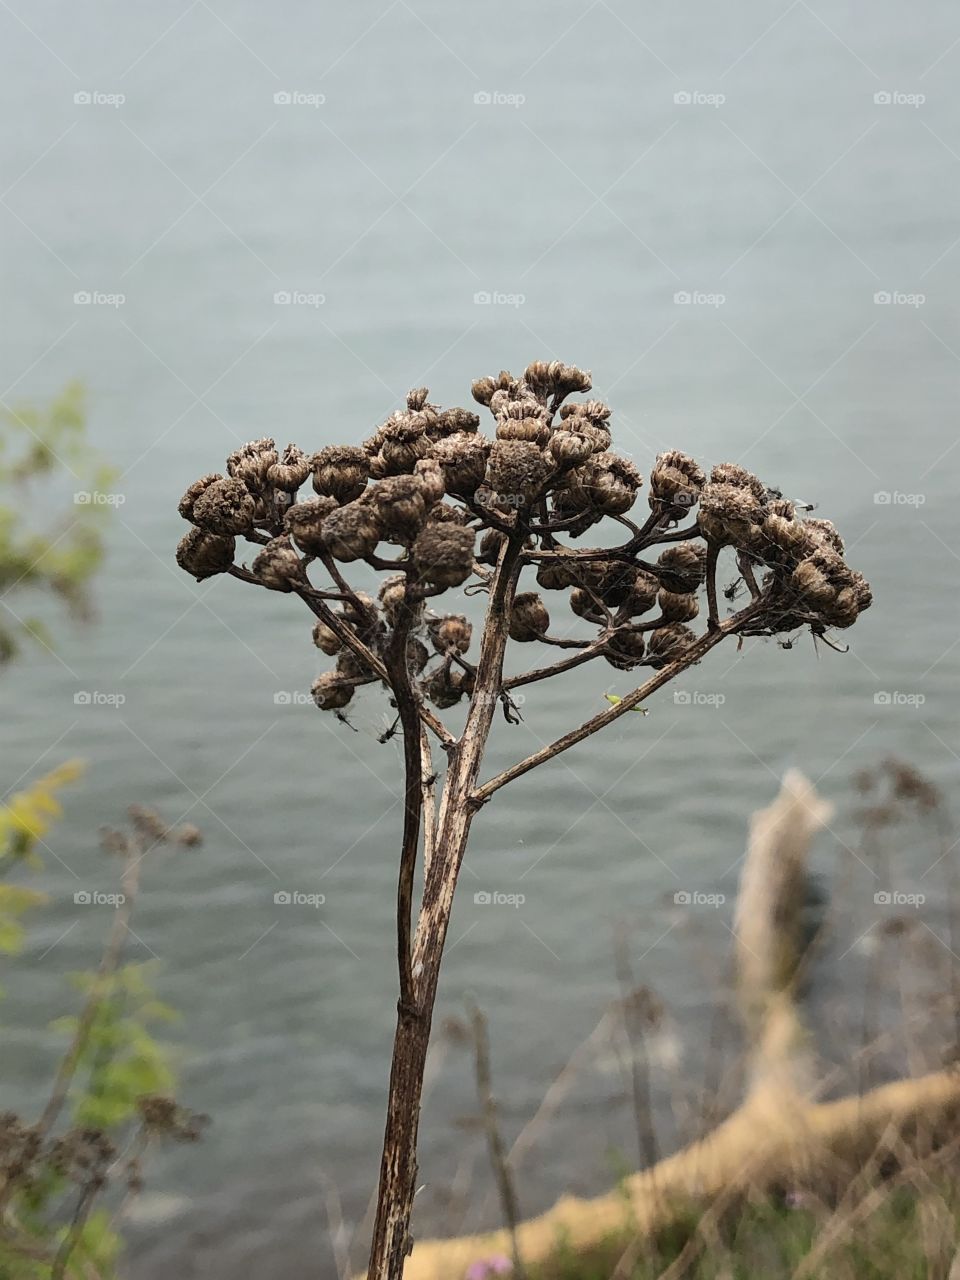 Seeds by the Lake 